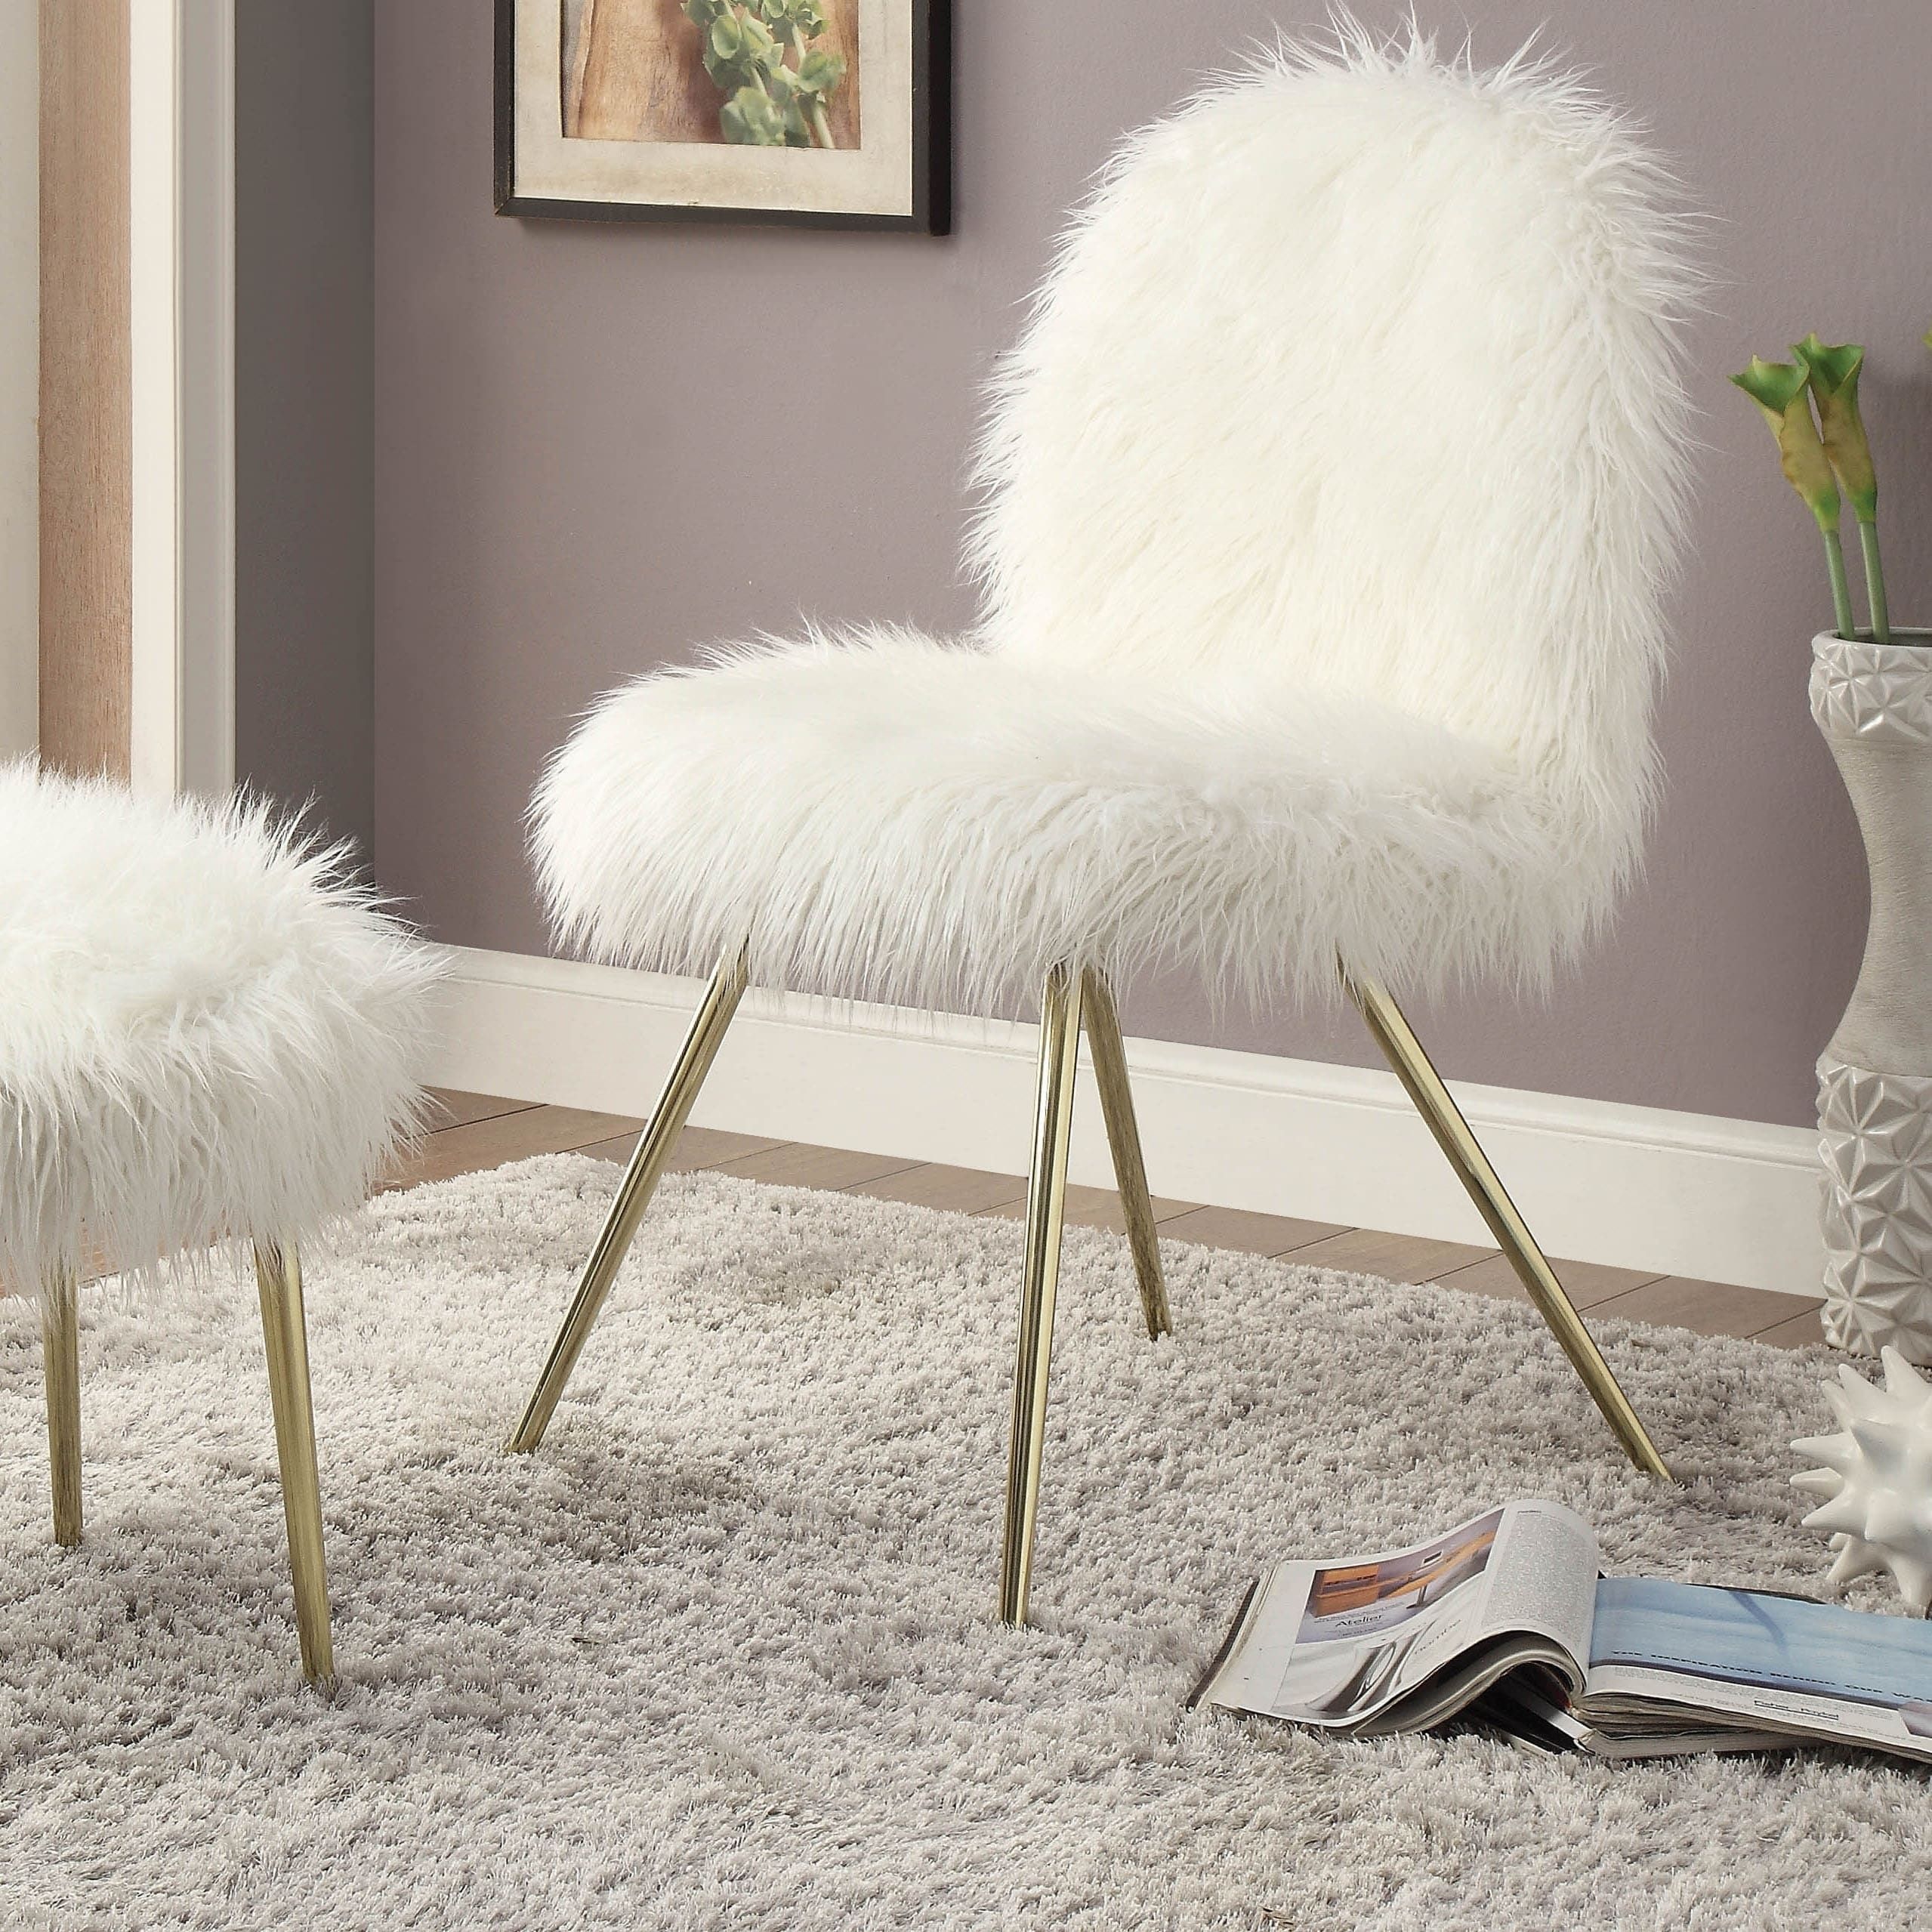 White Fluffy Chair Throughout Lack Faux Fur Round Accent Stools With Storage (View 6 of 20)